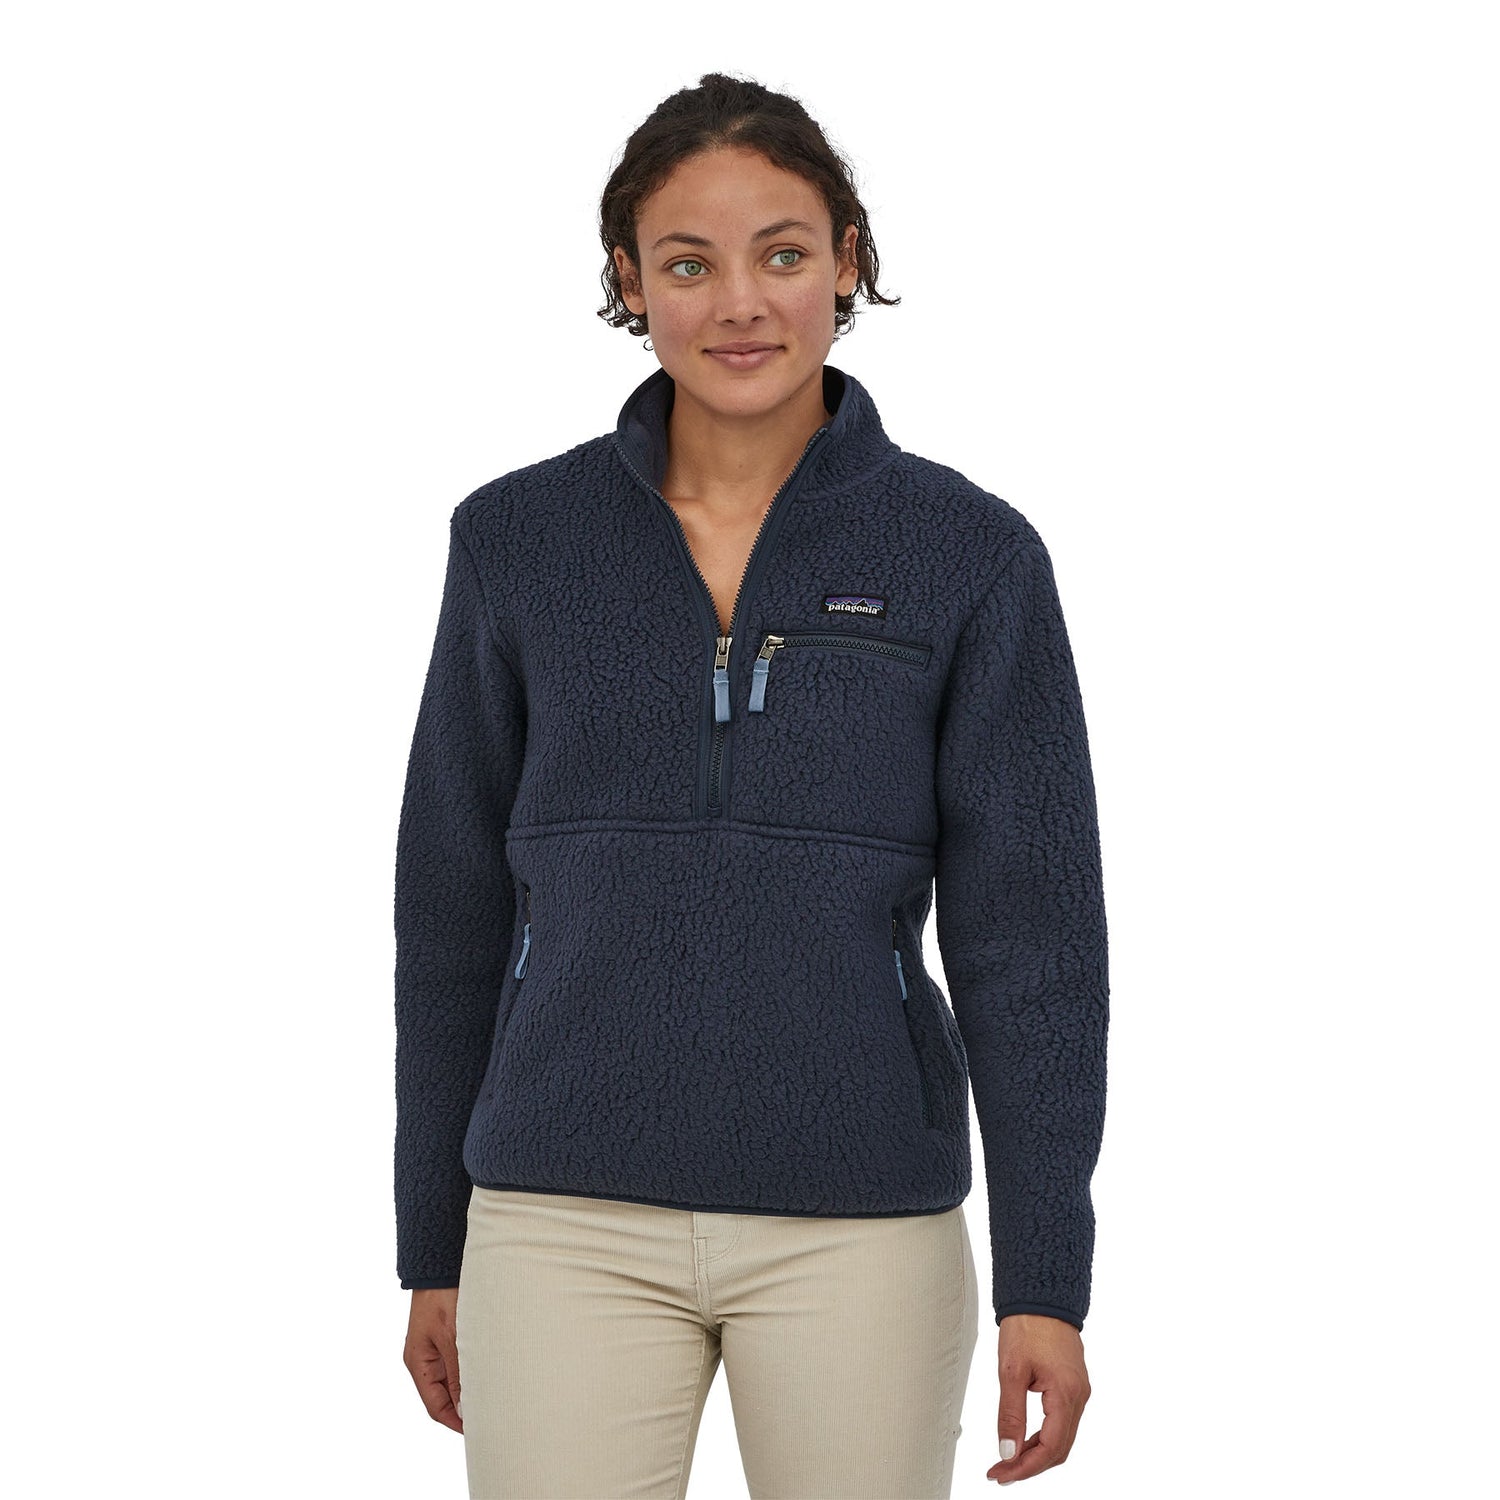 Patagonia W's Retro Pile Fleece Marsupial - Recycled Polyester New Navy Shirt